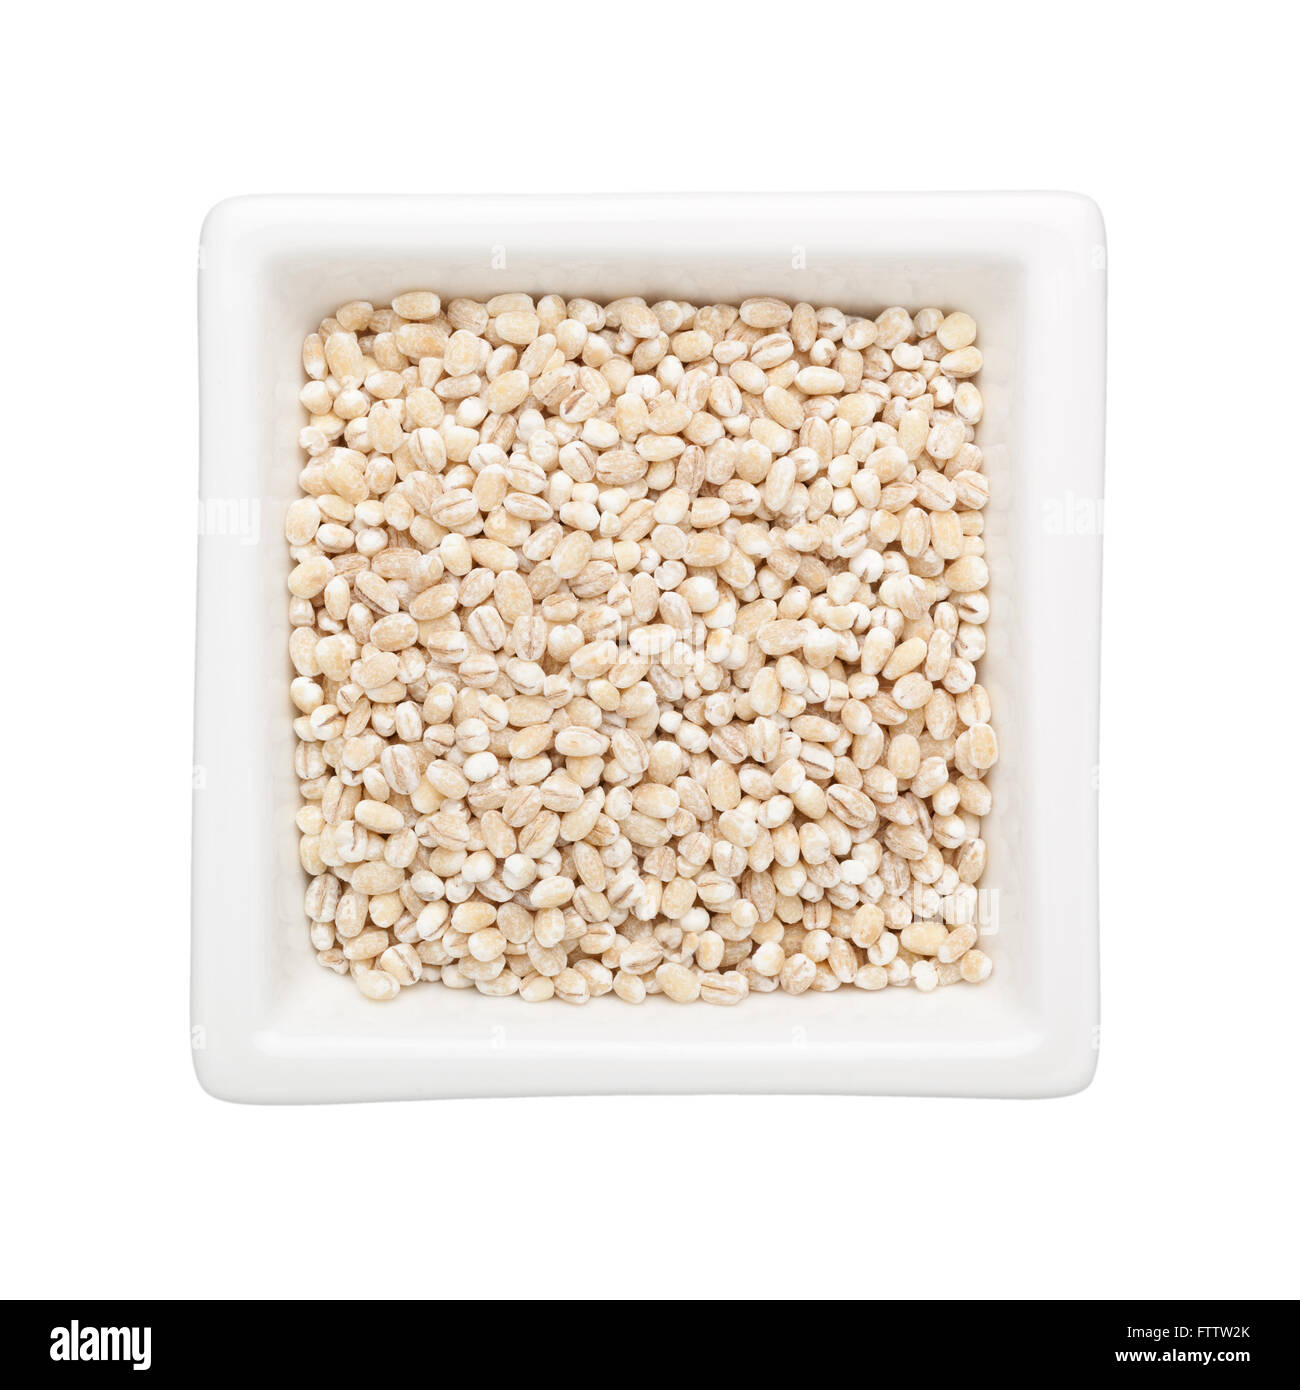 Barley grains in a square bowl isolated on white background Stock Photo